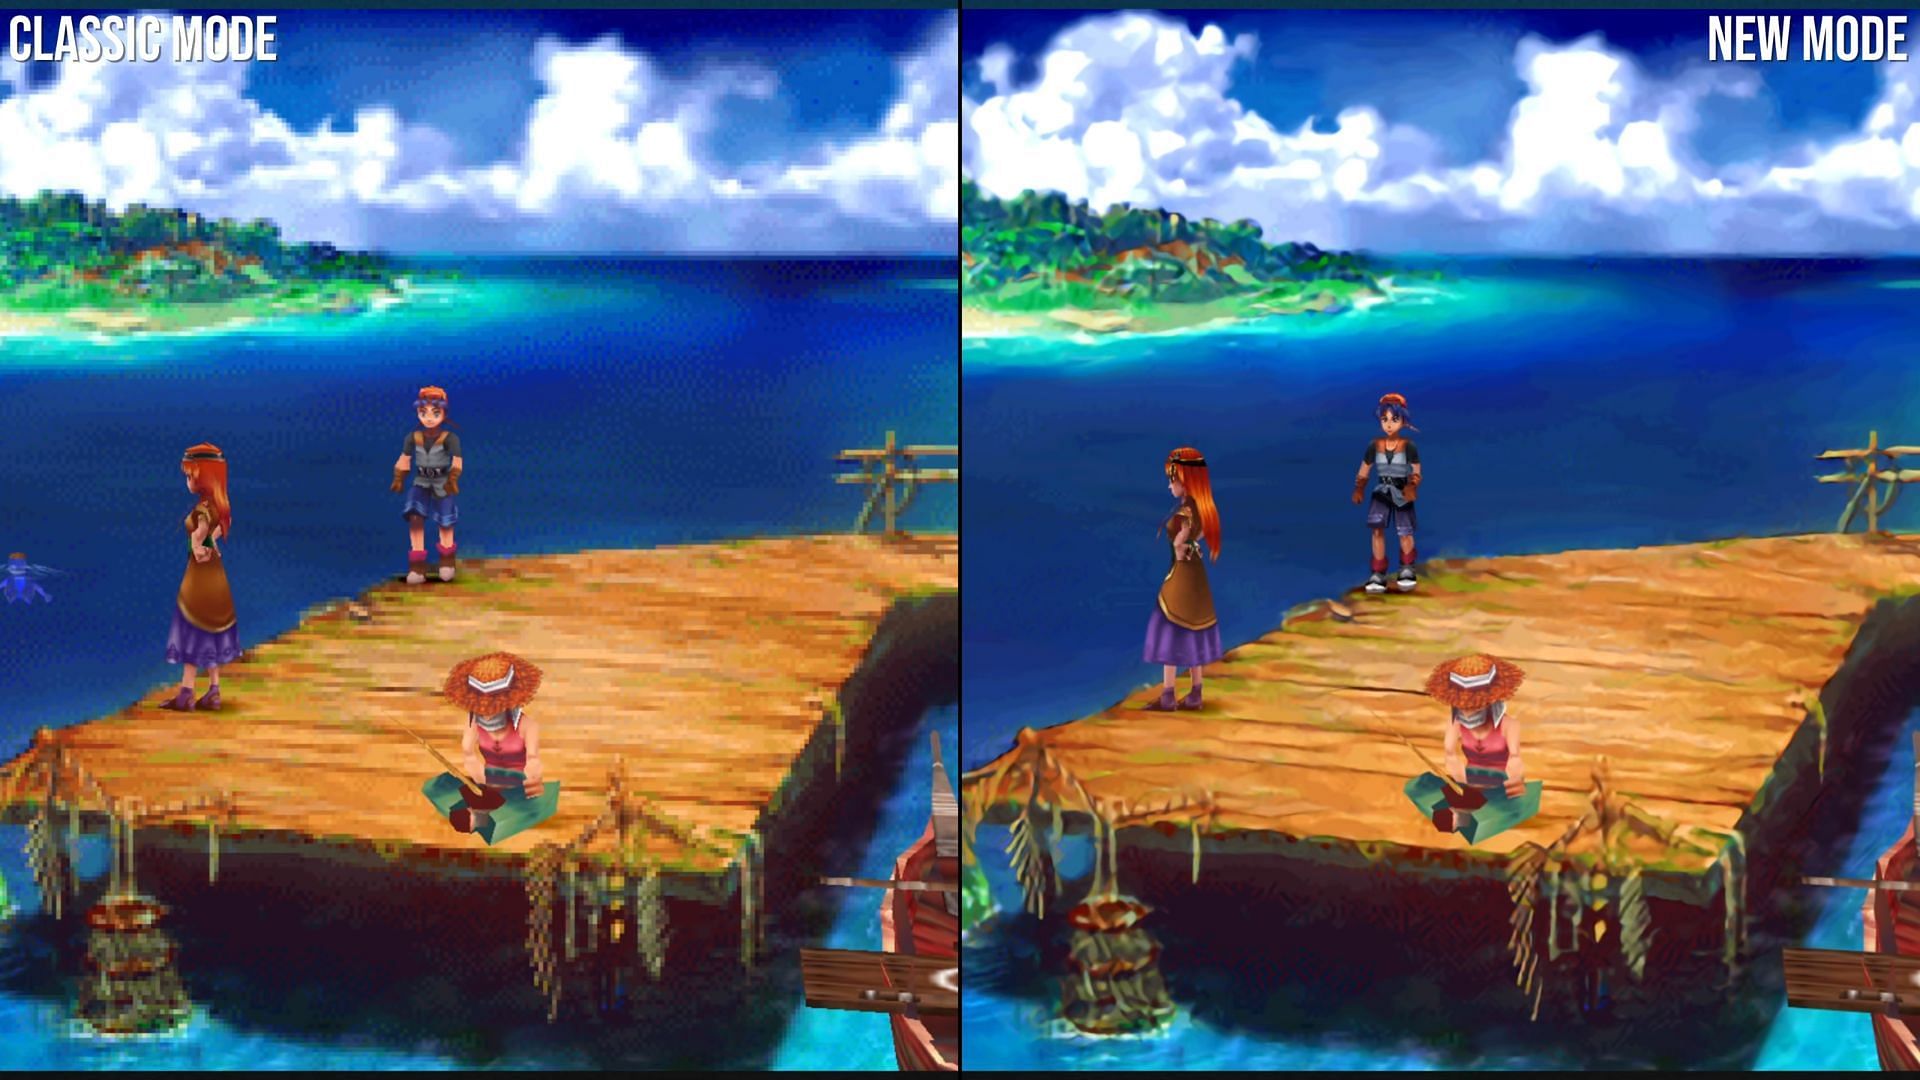 Chrono Cross was remastered because the devs feared the classic